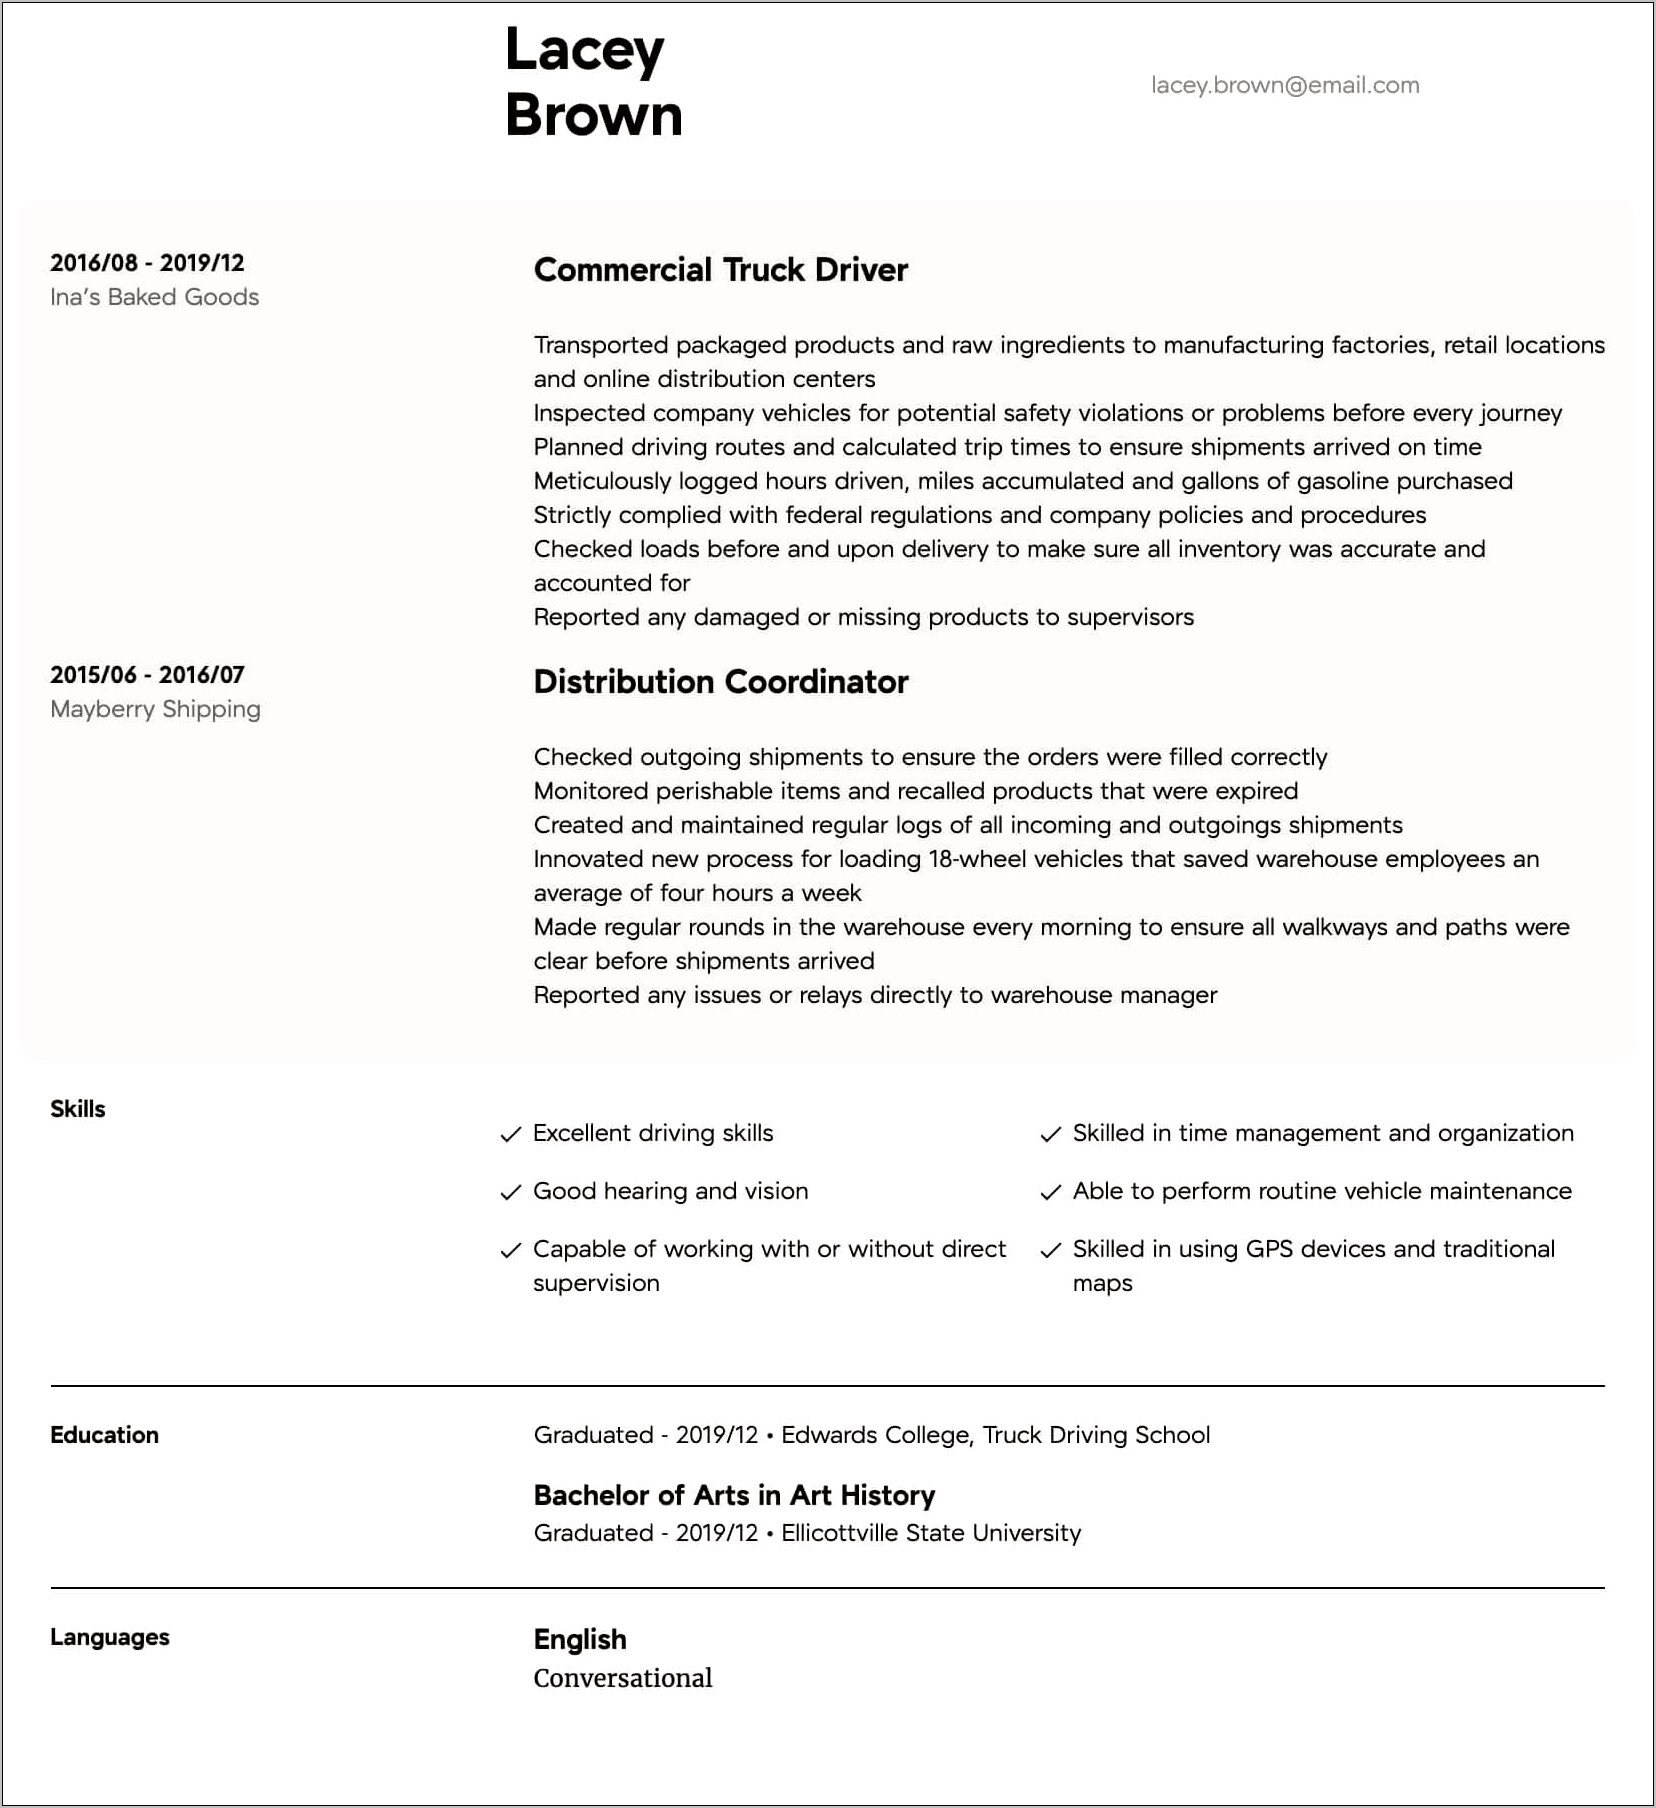 Ability To Work Without Supervision On Resume